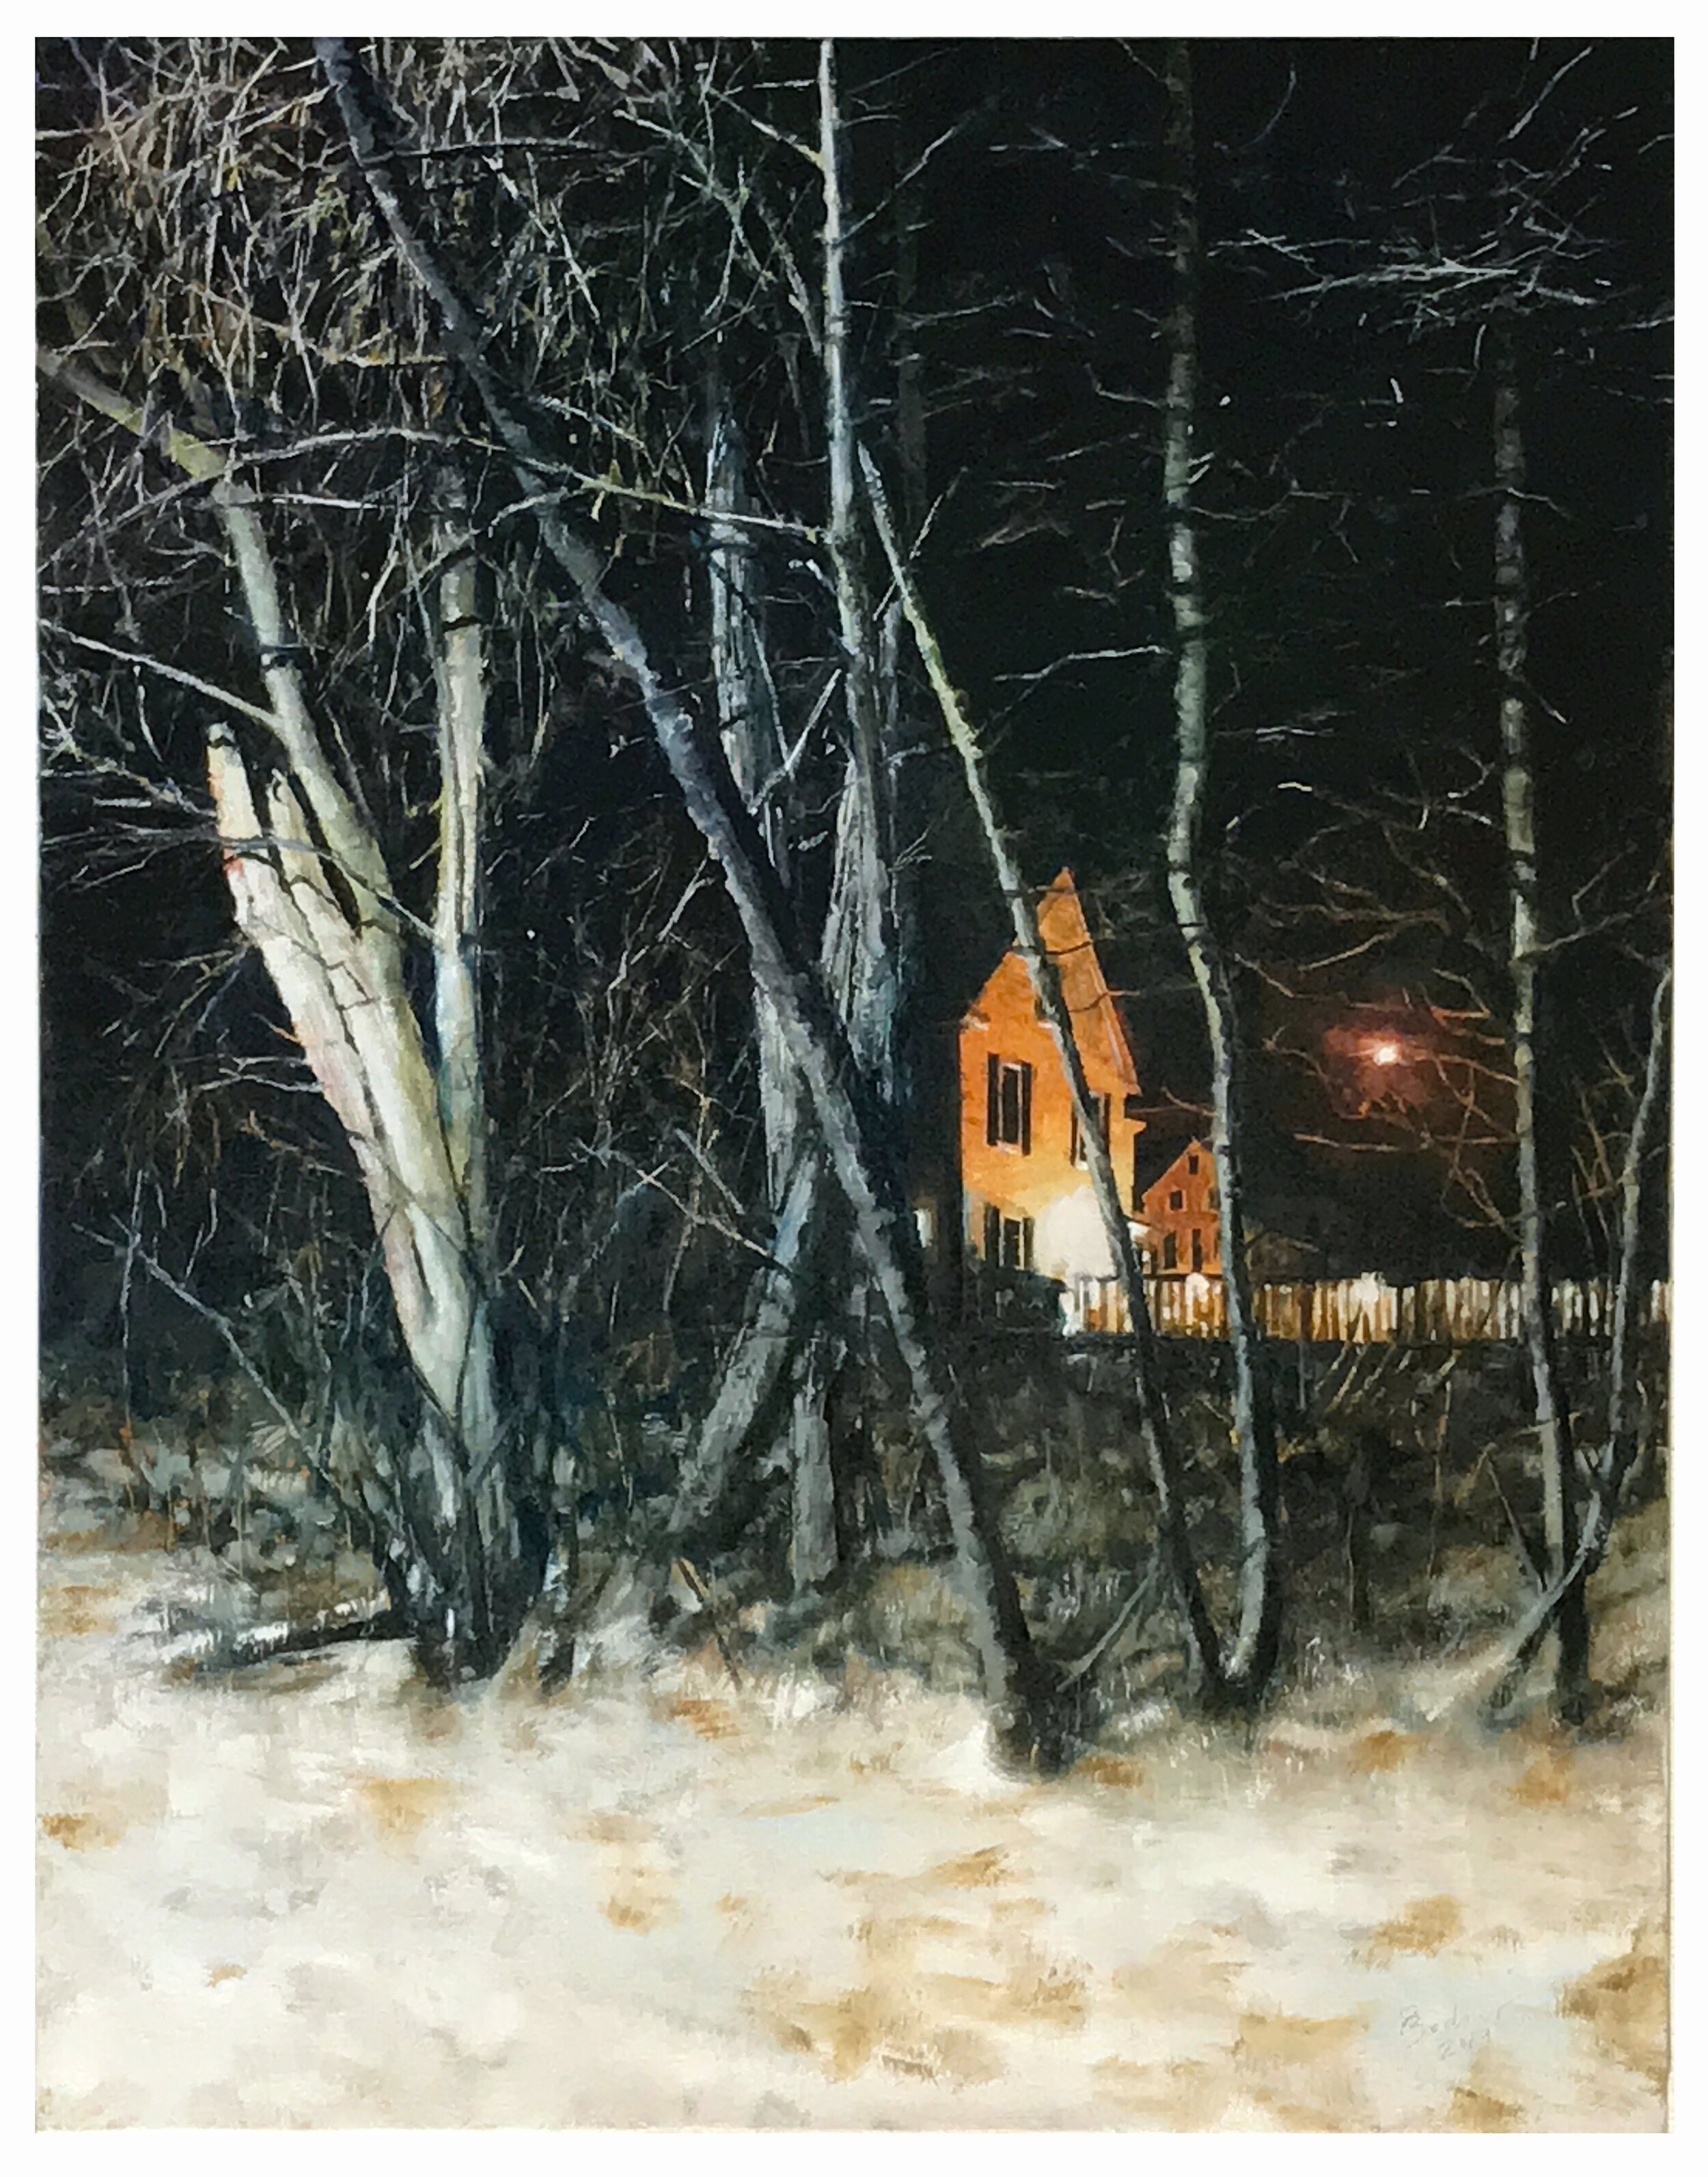  Winter 3 35.5 x 27.5 inches Oil on linen 2018 